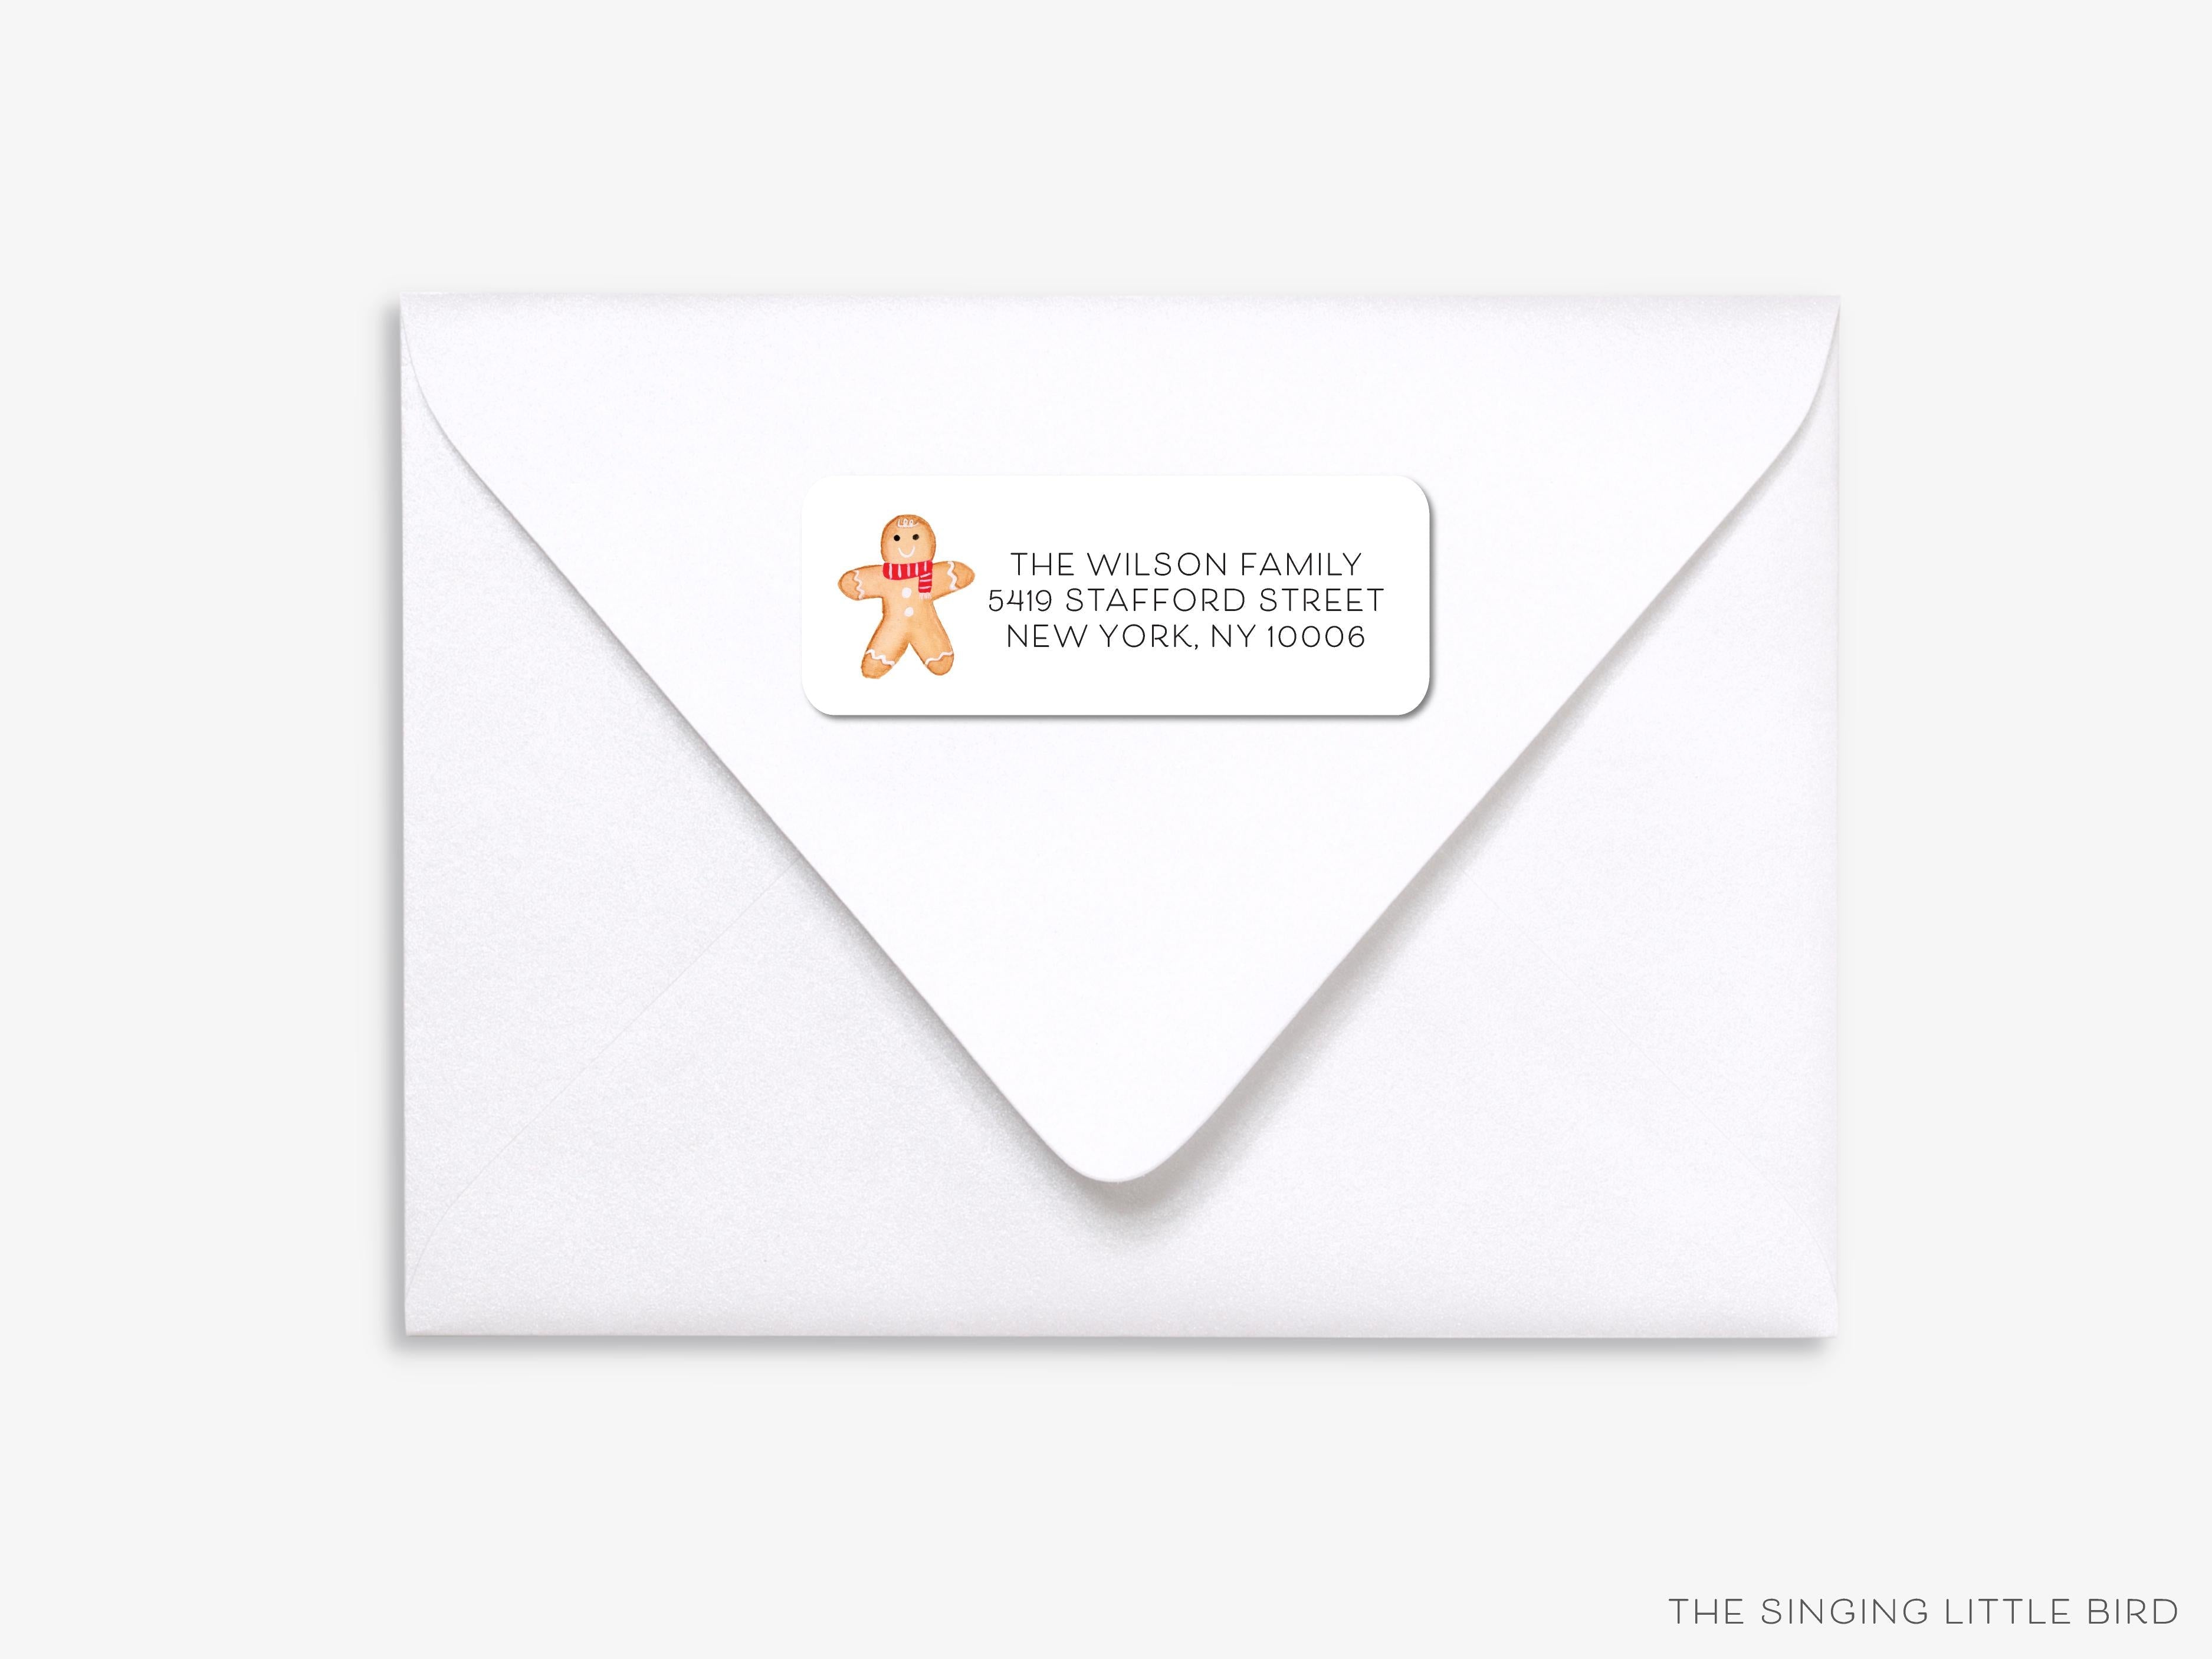 Gingerbread Man Return Address Labels-These personalized return address labels are 2.625" x 1" and feature our hand-painted watercolor Gingerbread Man, printed in the USA on beautiful matte finish labels. These make great gifts for yourself or the Christmas cookie lover.-The Singing Little Bird